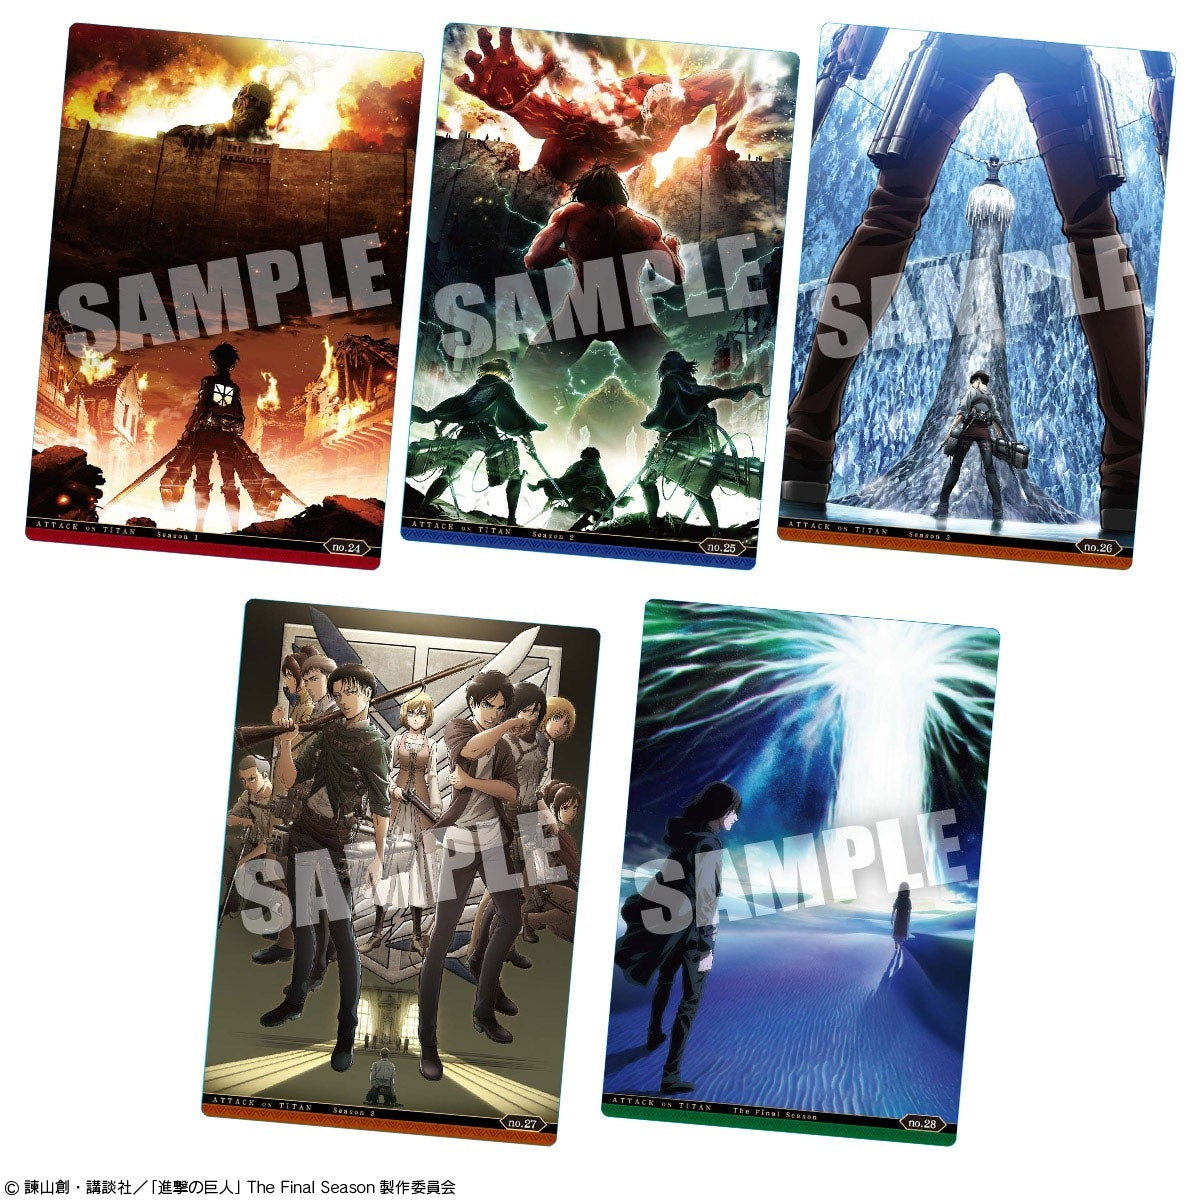 Attack On Titan The Final Season Wafer 2-Single Pack (Random)-Bandai-Ace Cards &amp; Collectibles